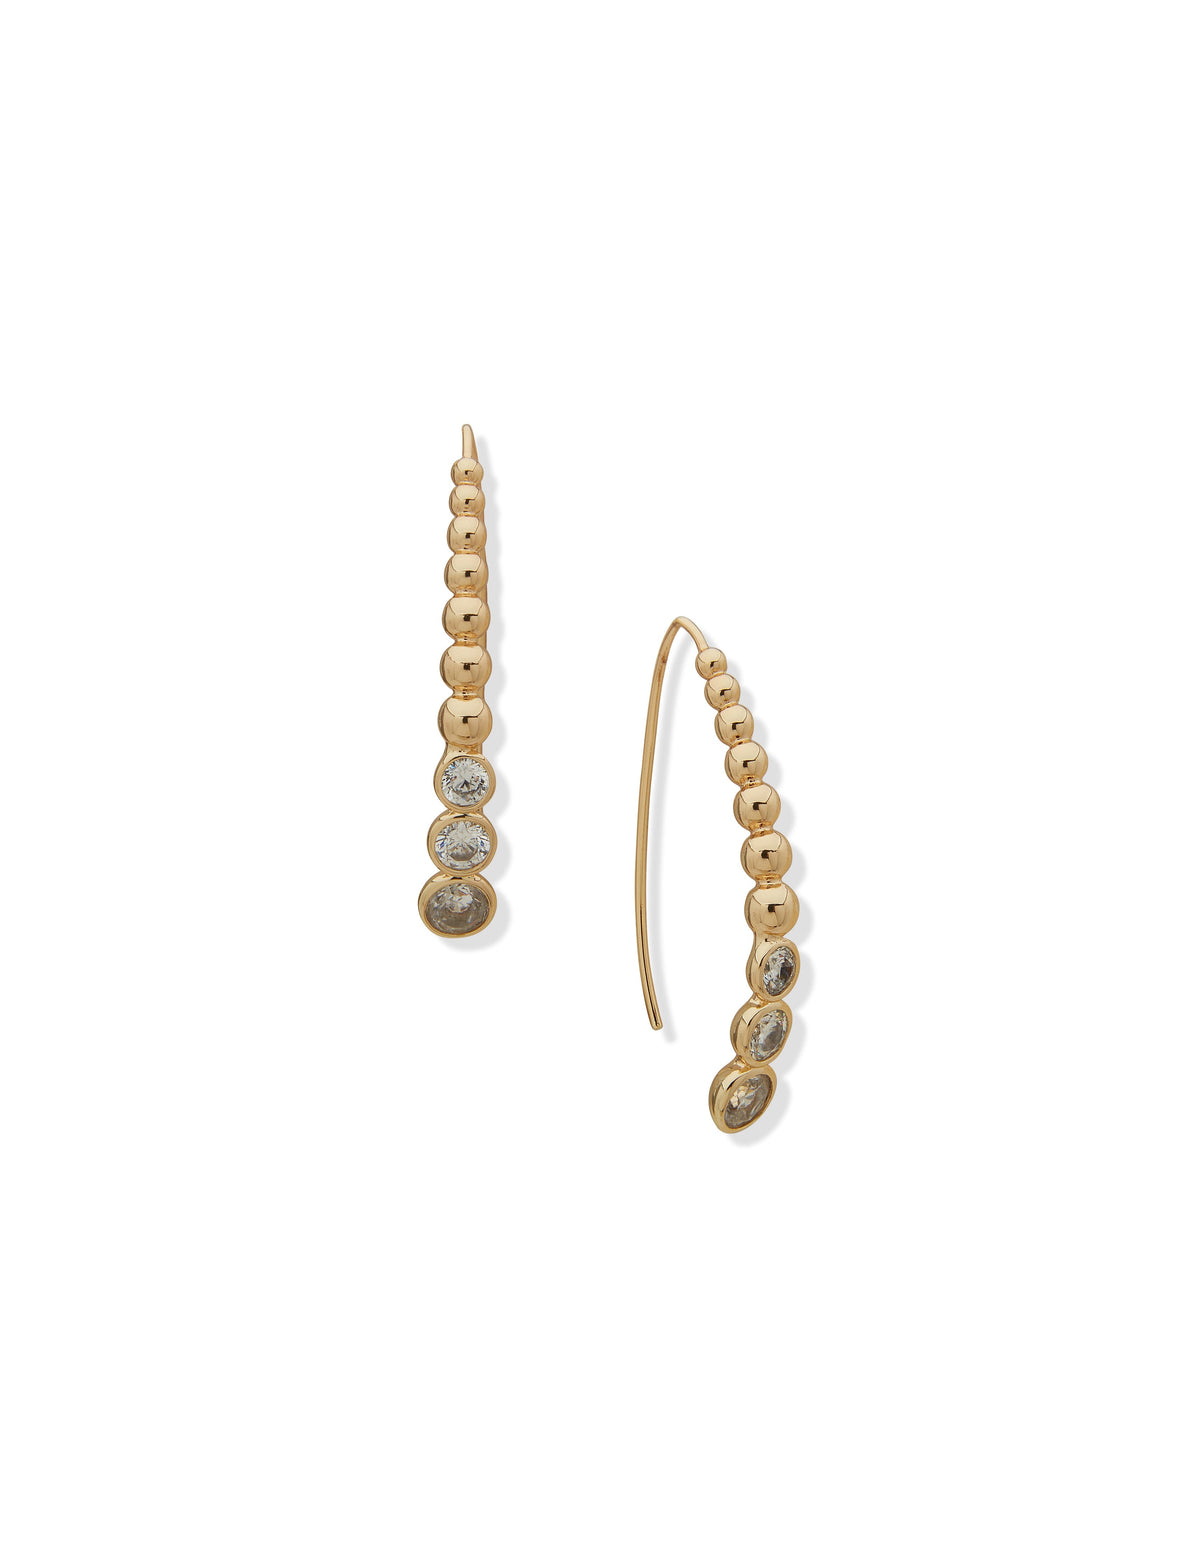 Anne Klein Gold Tone Gold Bead and Stone Threader Earrings